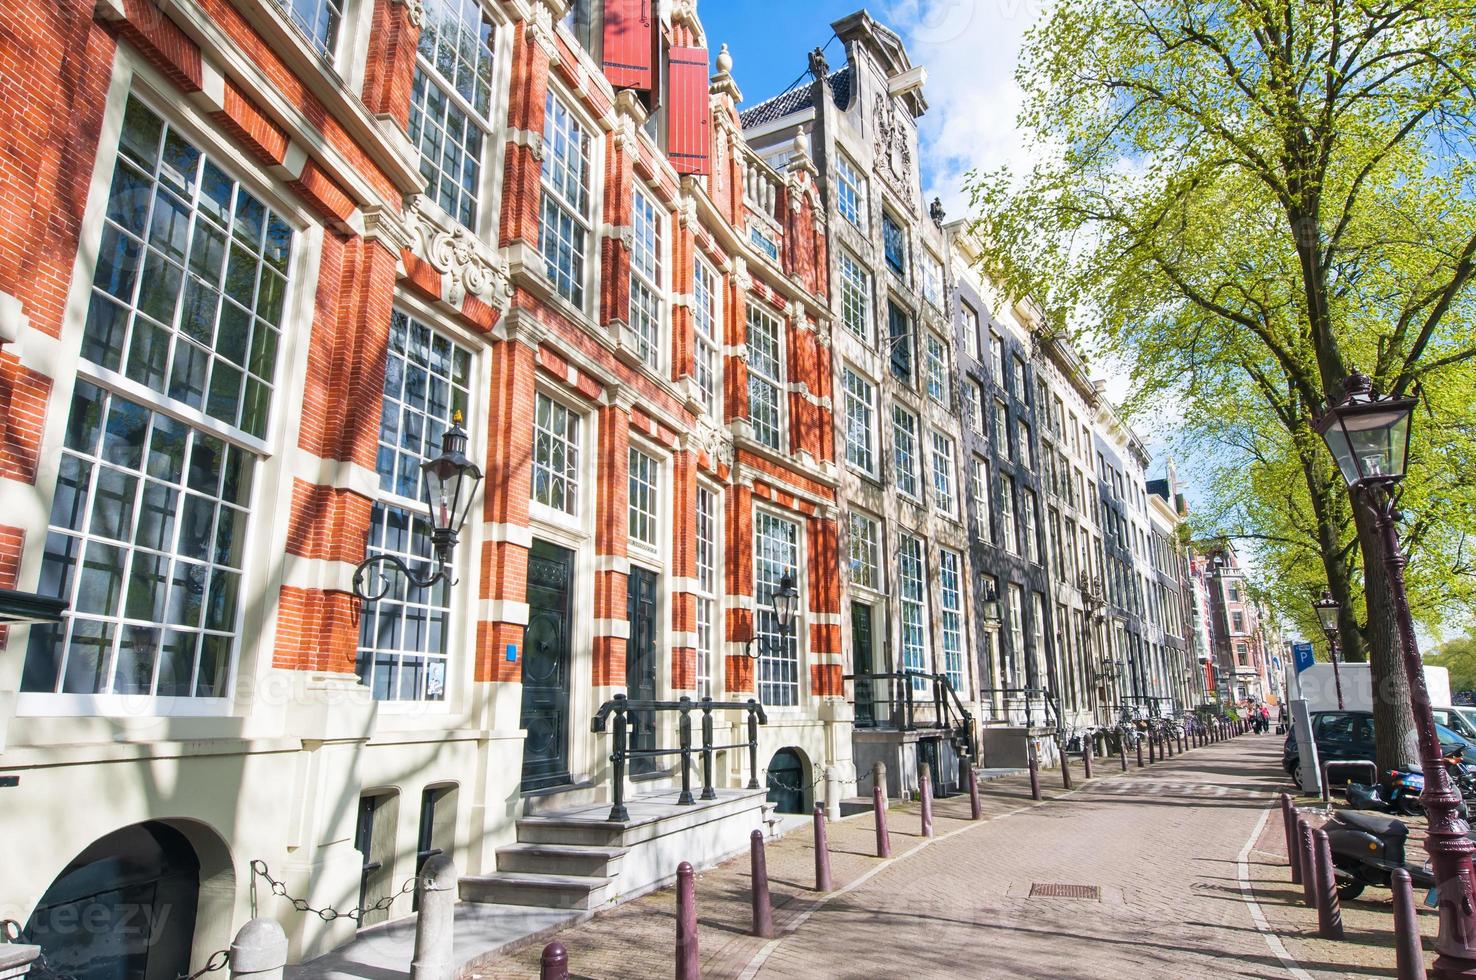 Amsterdam street with 17th century residence buildings. photo